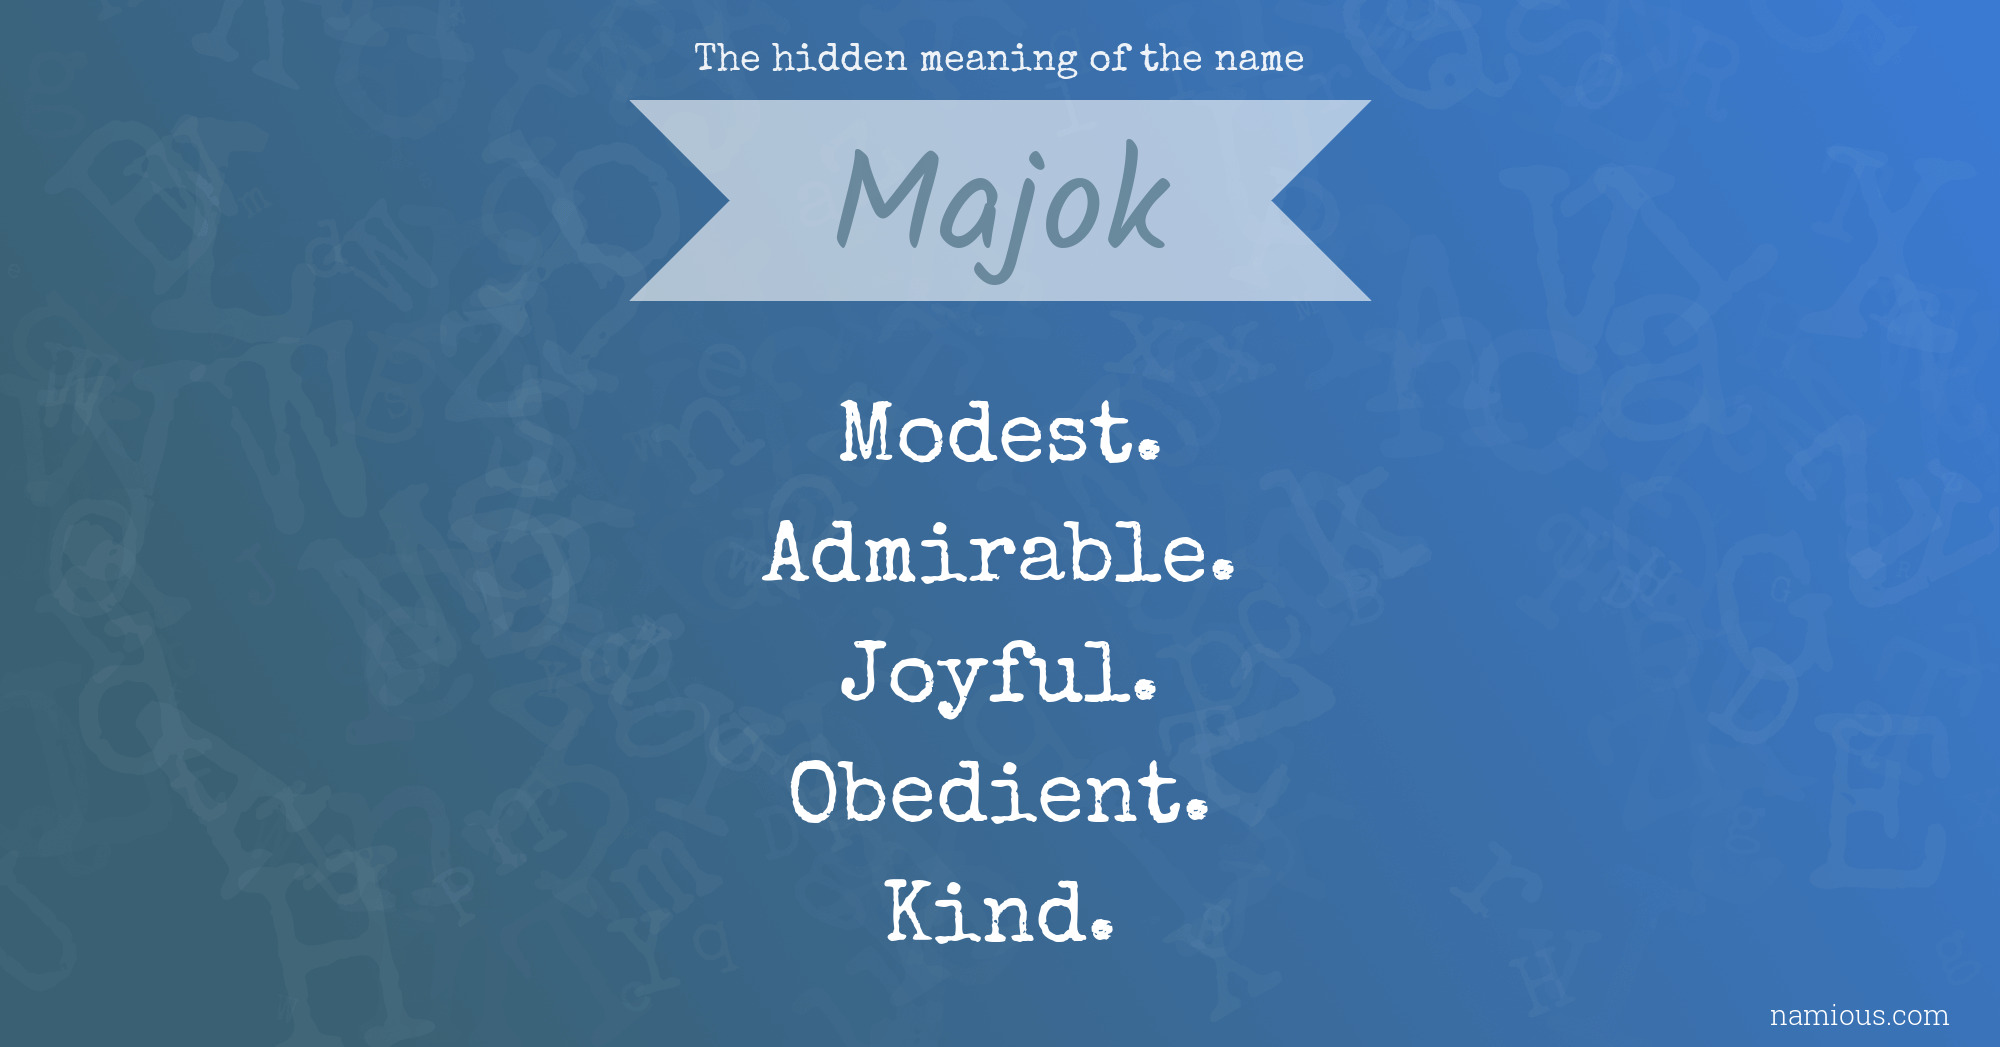 The hidden meaning of the name Majok